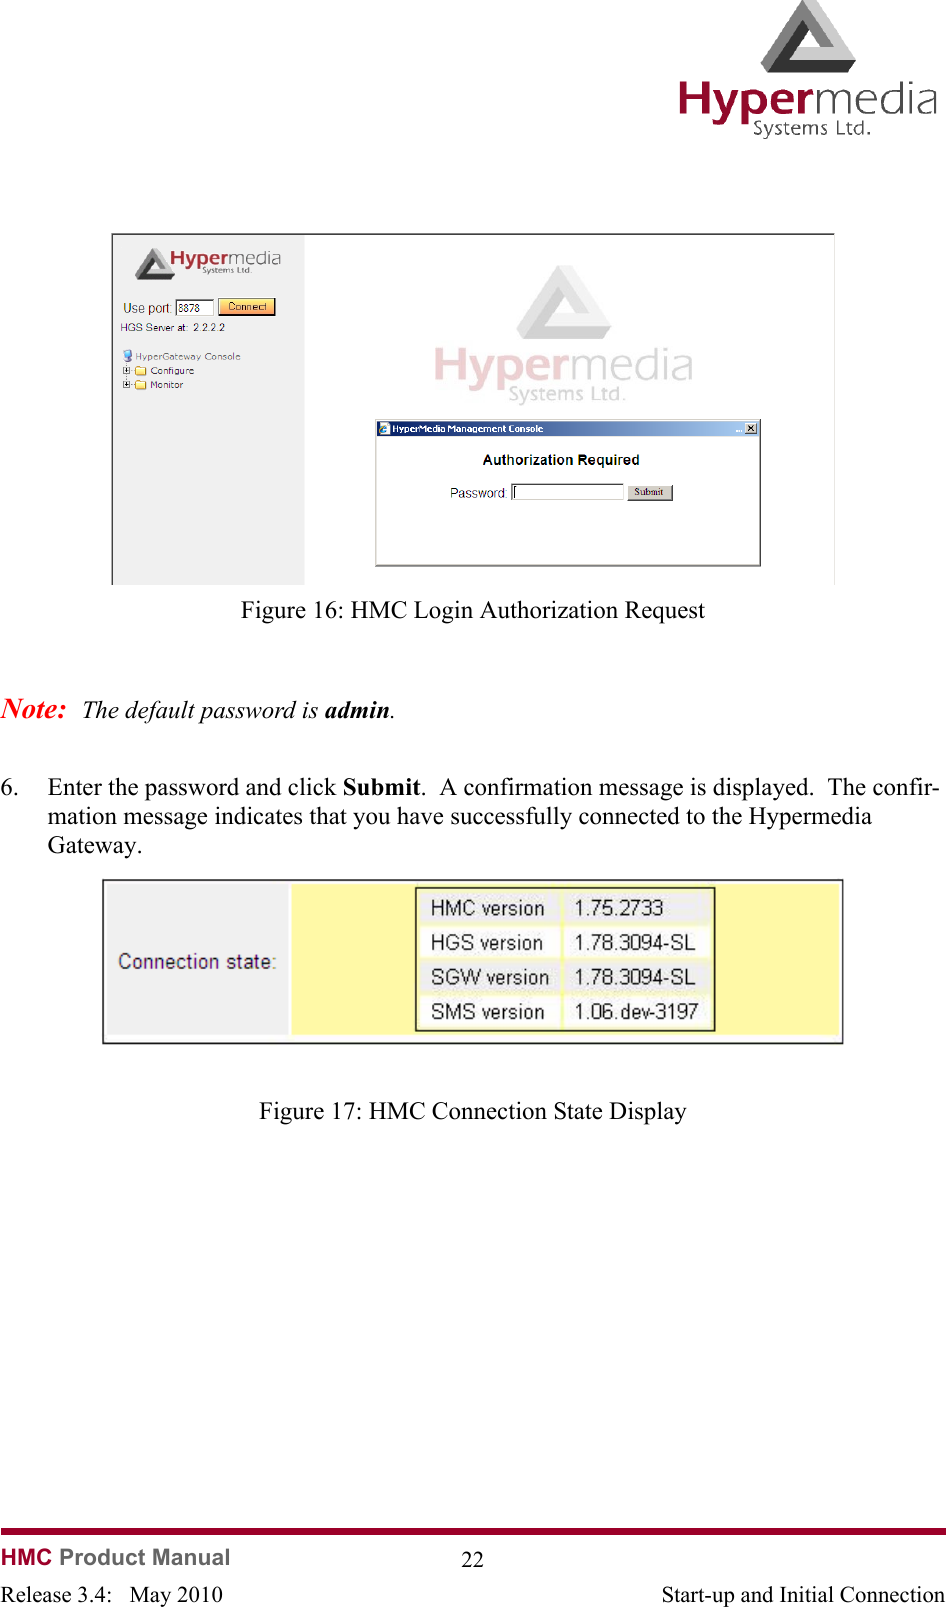   HMC Product Manual  22Release 3.4:   May 2010 Start-up and Initial Connection              Figure 16: HMC Login Authorization RequestNote:  The default password is admin.6. Enter the password and click Submit.  A confirmation message is displayed.  The confir-mation message indicates that you have successfully connected to the Hypermedia Gateway.              Figure 17: HMC Connection State Display